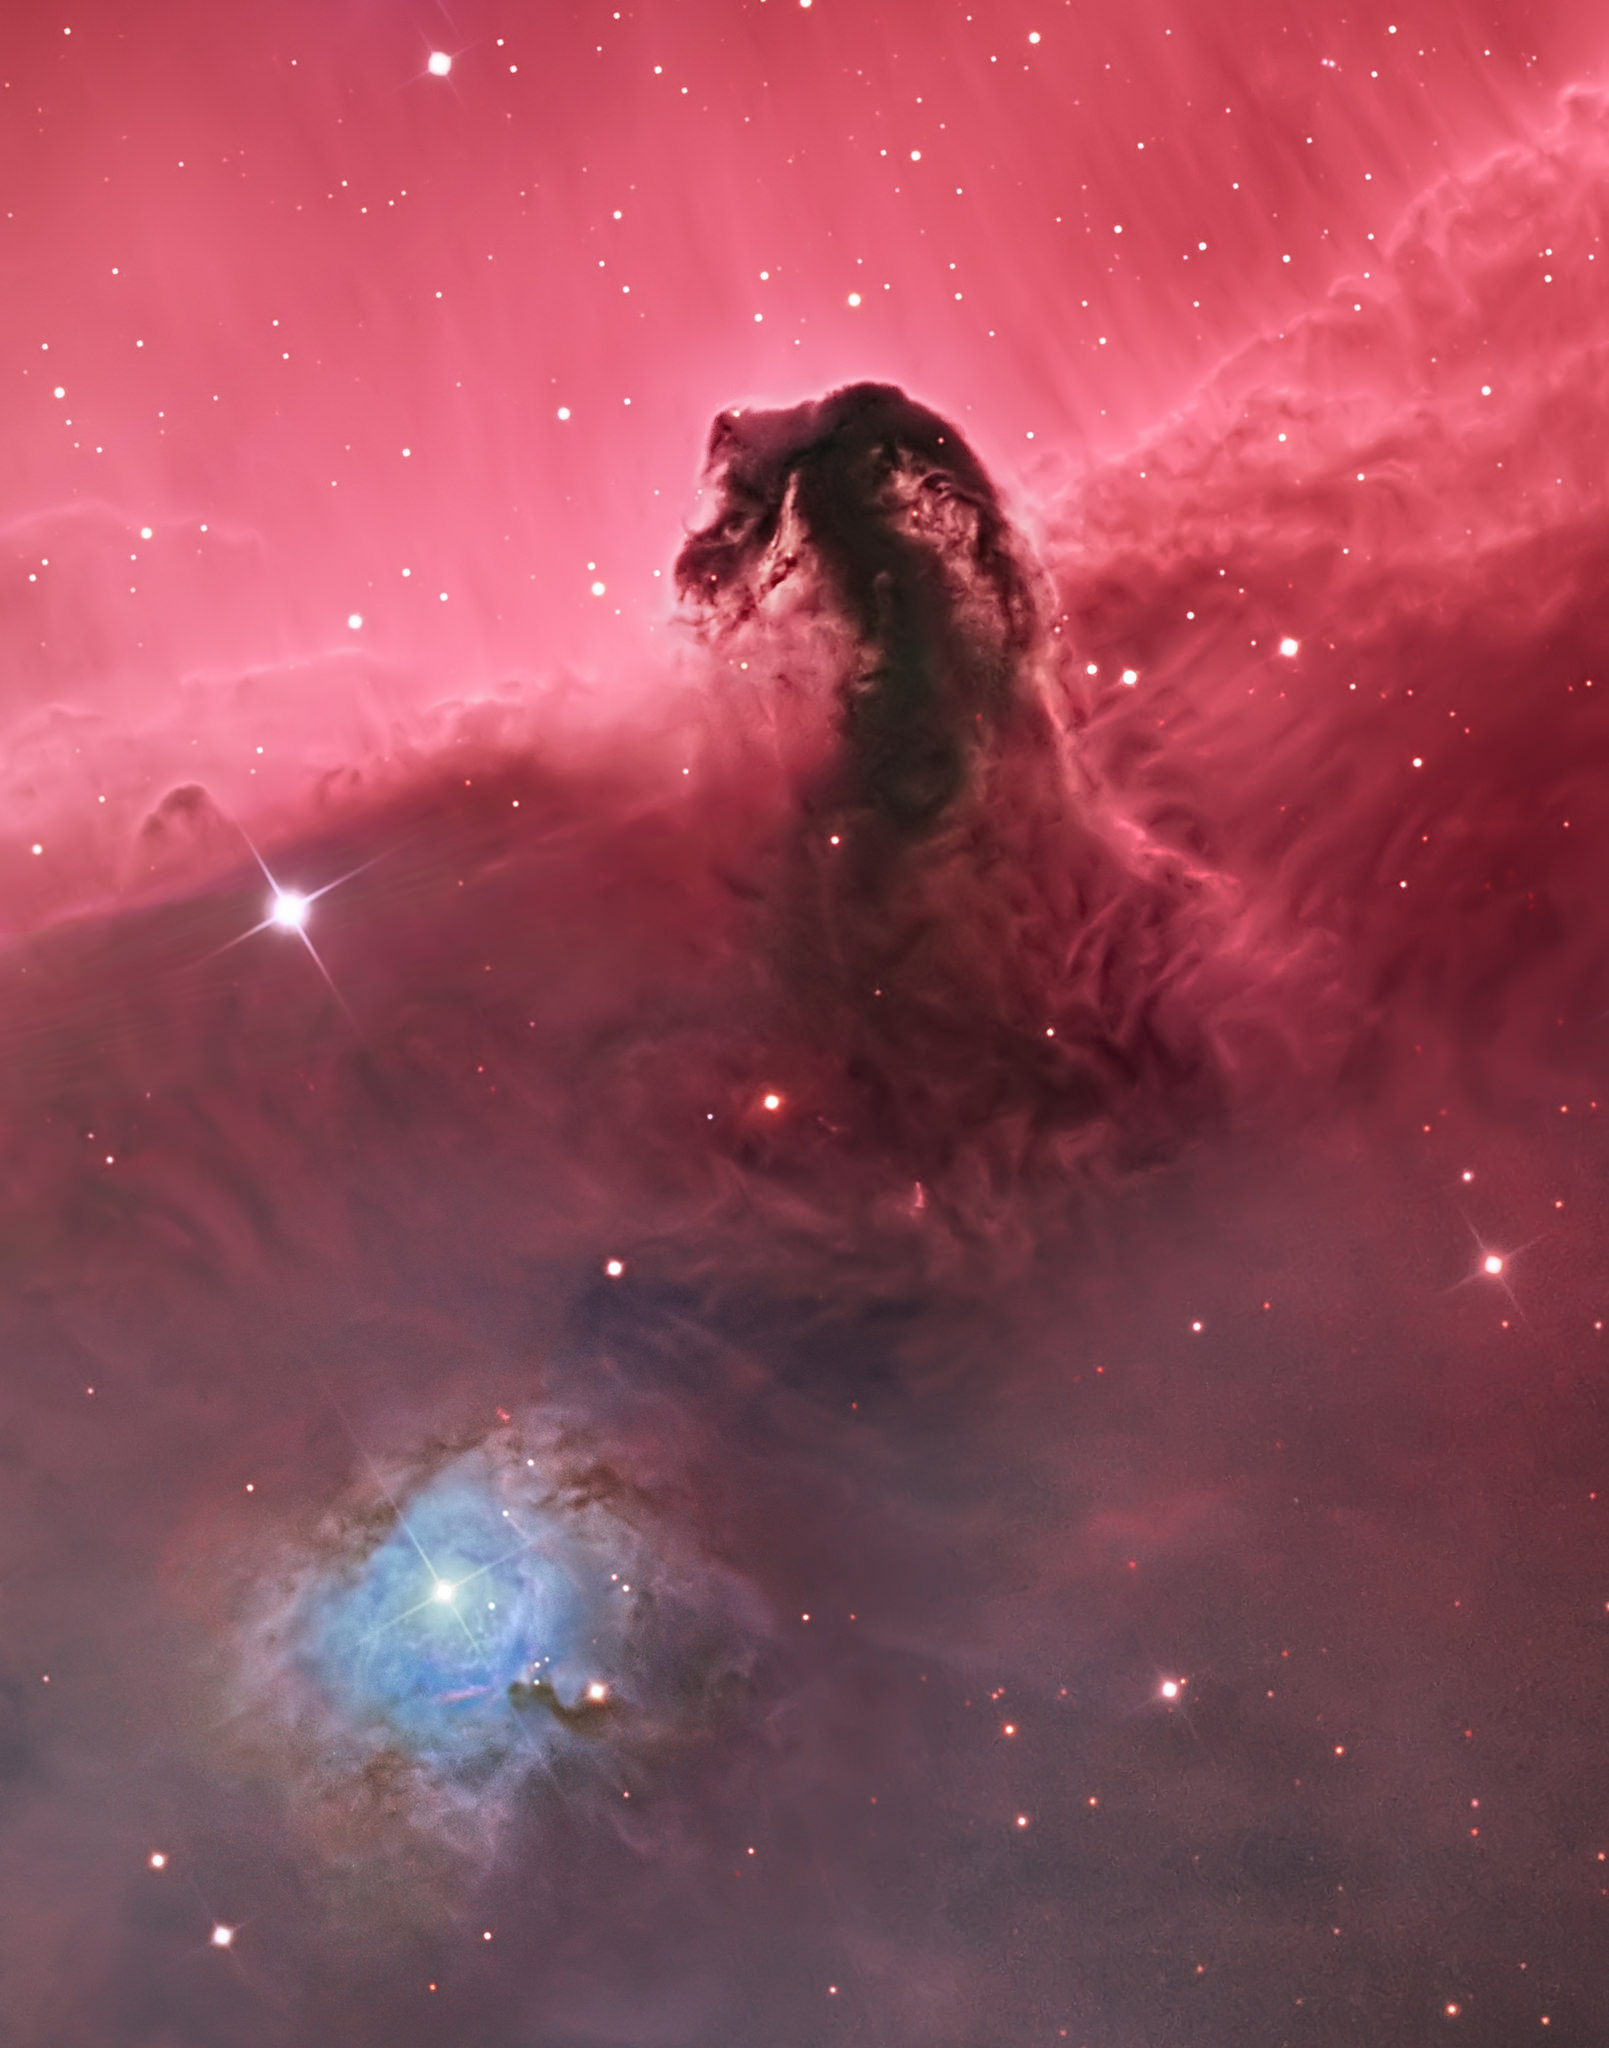 Astrophotography by AAAP Members will be featured at the AAAP November Meeting. Here is an example of an astrophotograph taken by an AAAP member. Horsehead Nebula by Bill Snyder. For more on this photo, please scan over earlier posts.